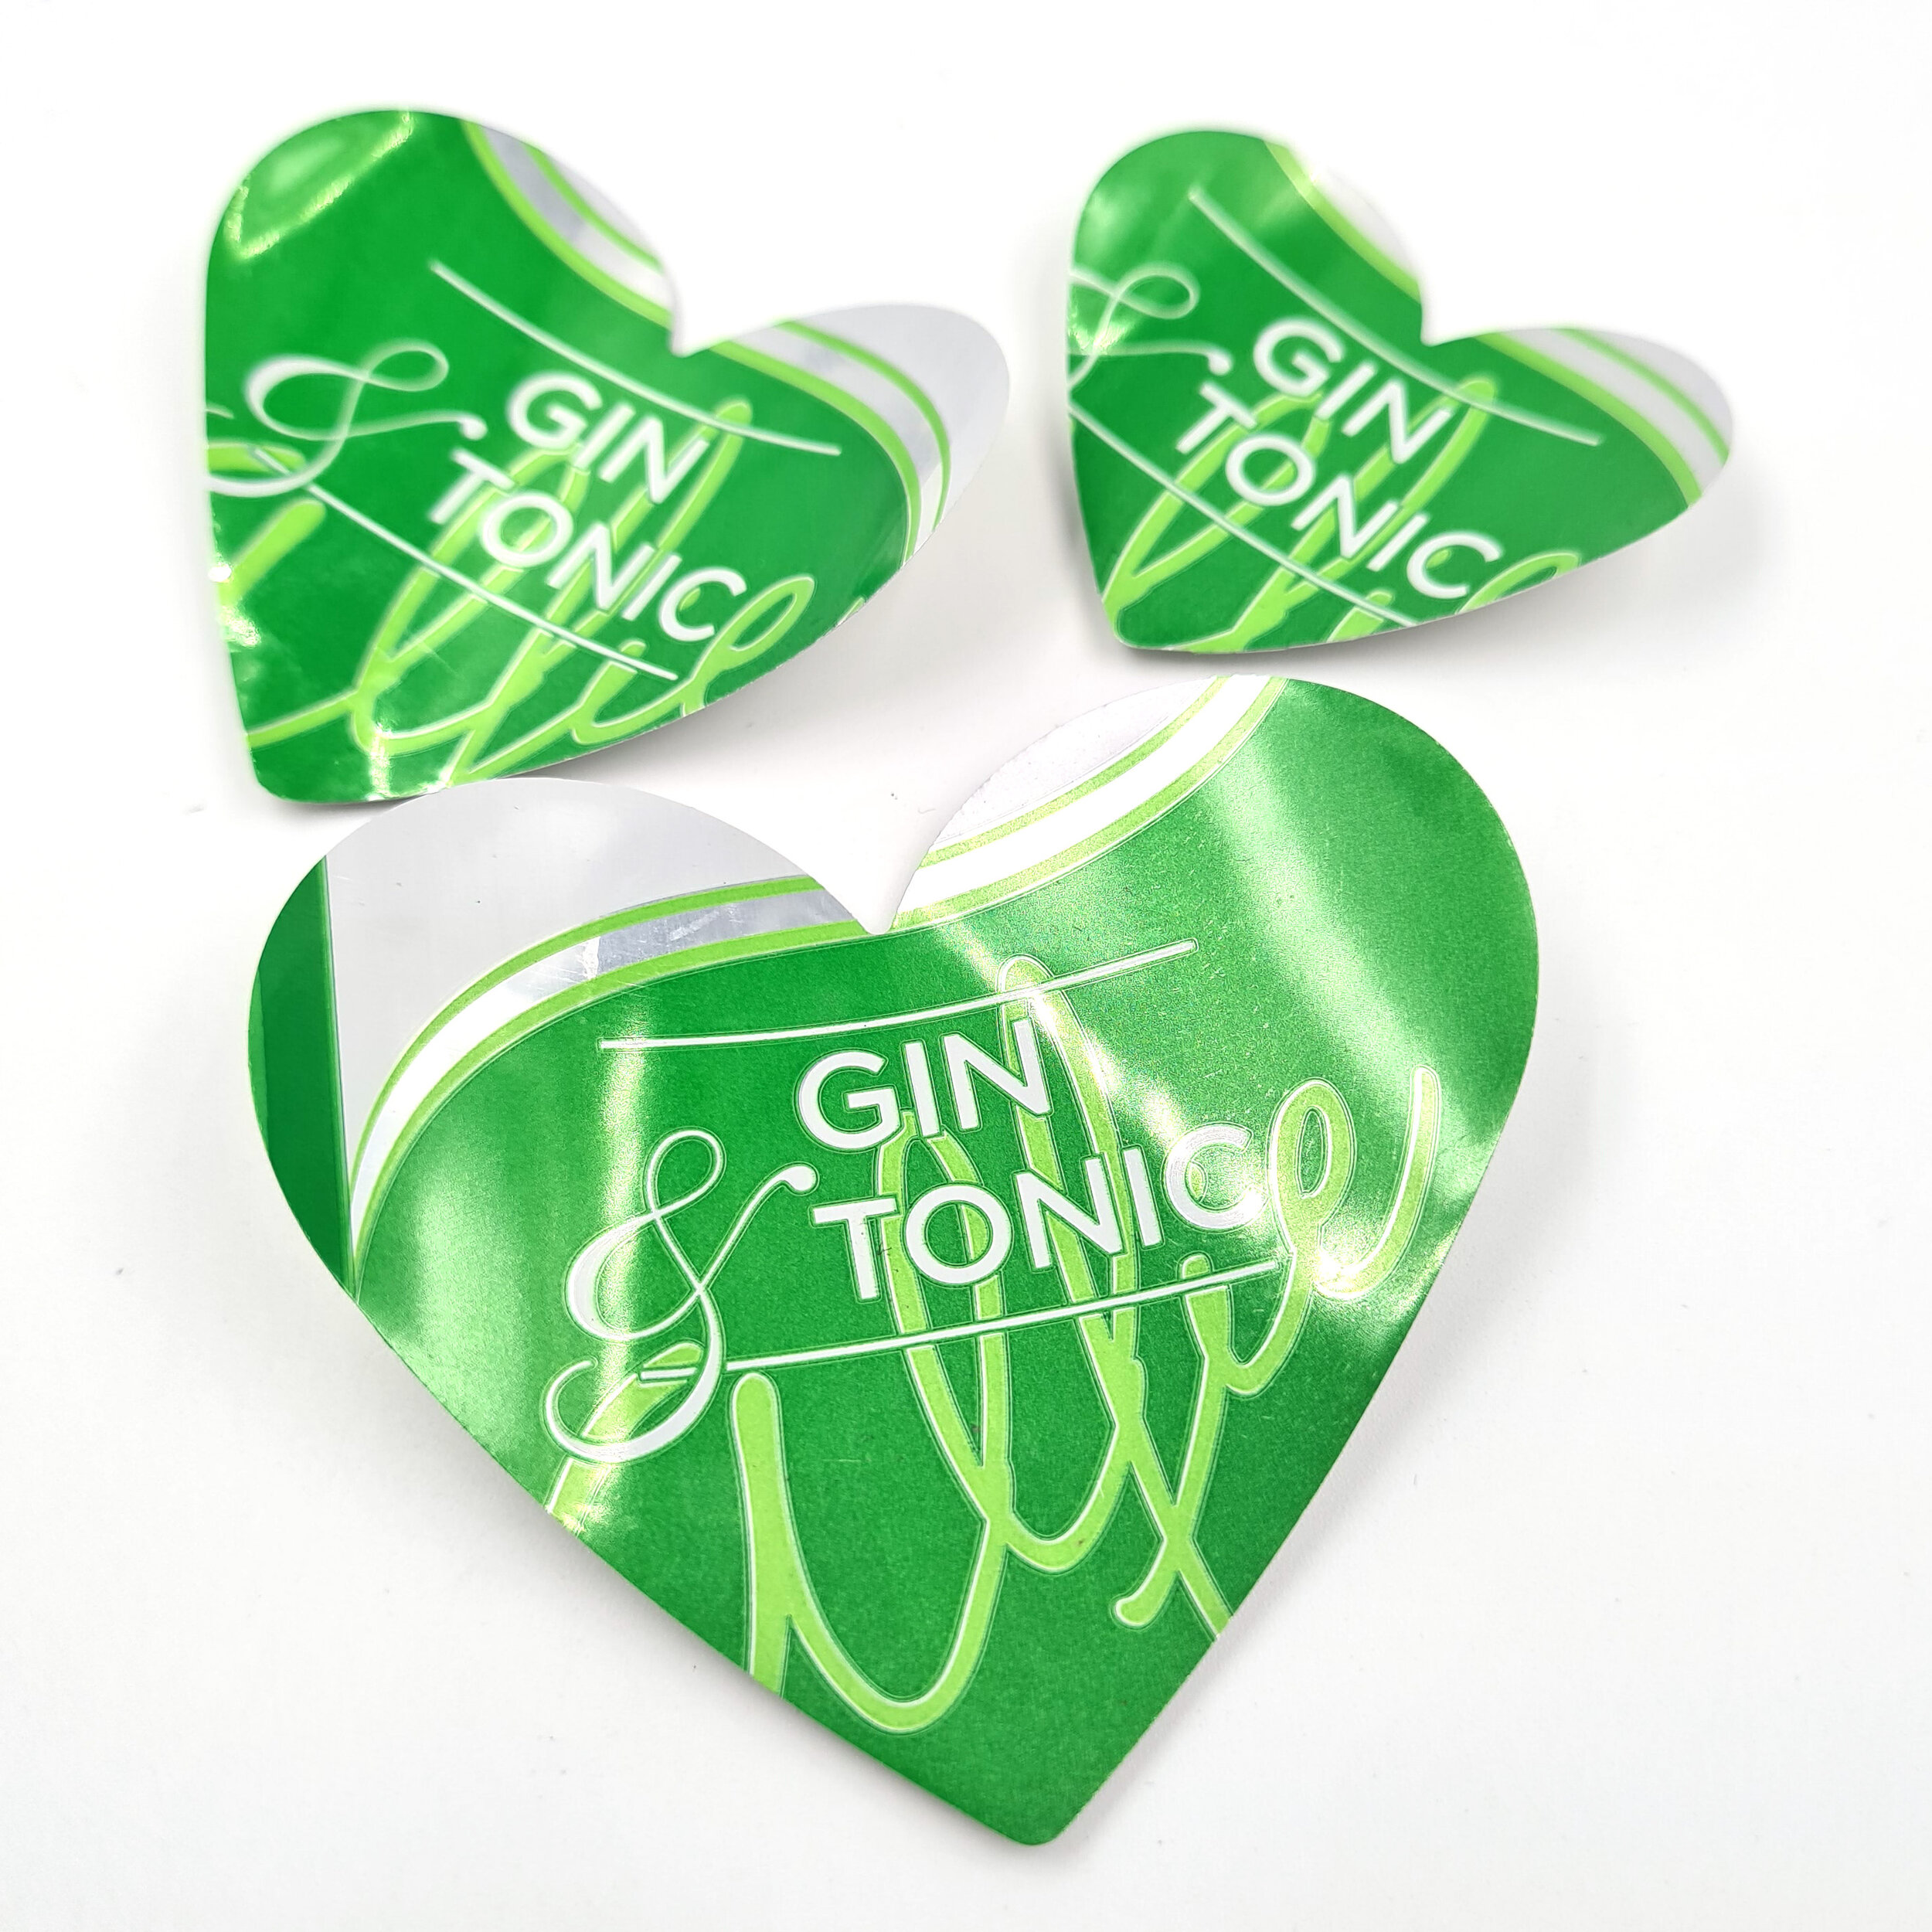 Three Gin &amp; Tonic Heart Can Magnets Eco art 